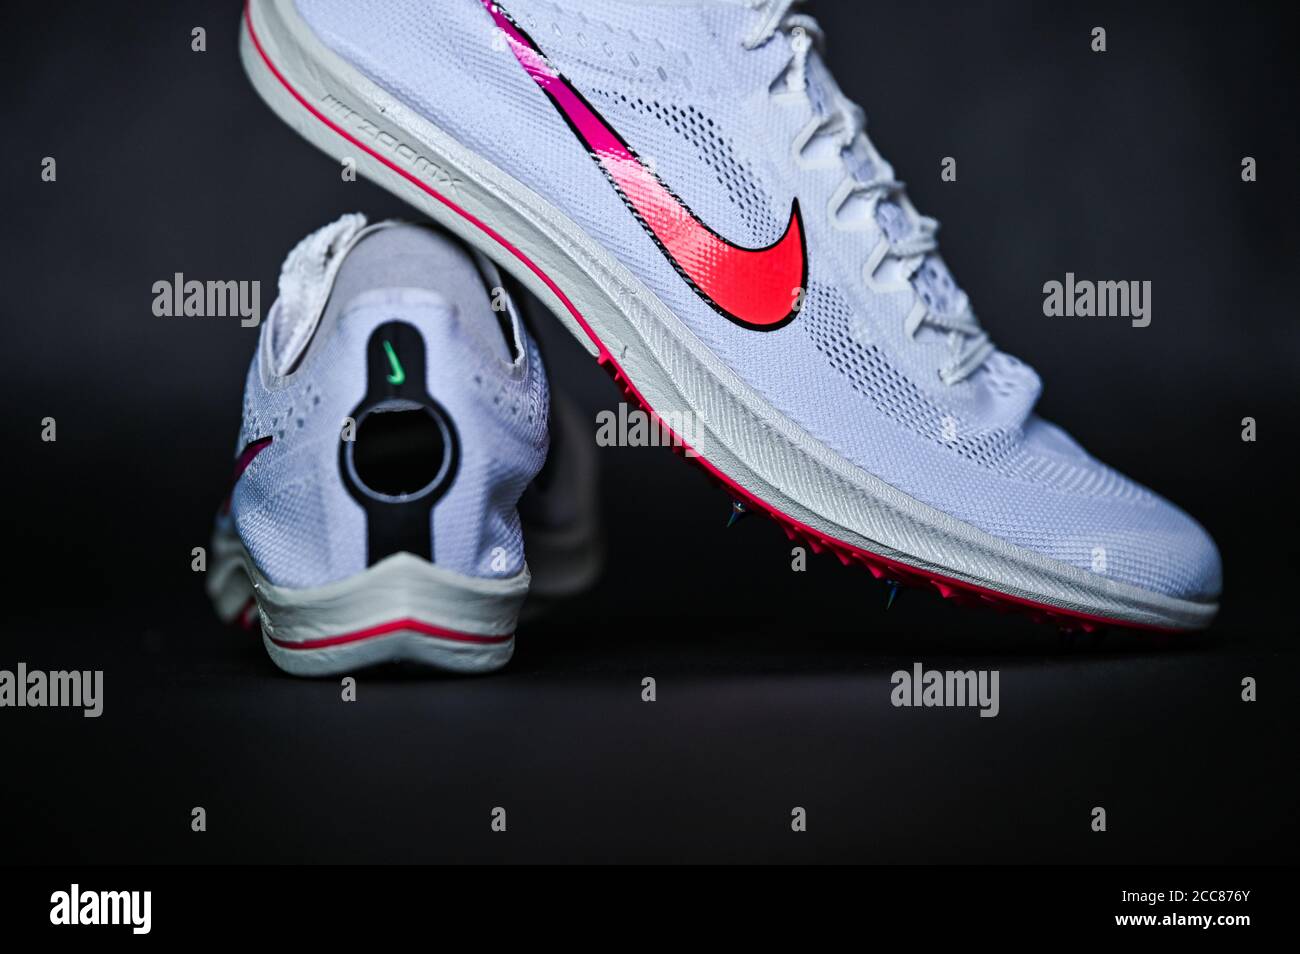 BANGKOK, THAILAND, AUGUST 17. 2020. Nike ZoomX Dragonfly Racing Spike.  Controversial Track and Field Athletics Spike for professional Athletes at  Summ Stock Photo - Alamy